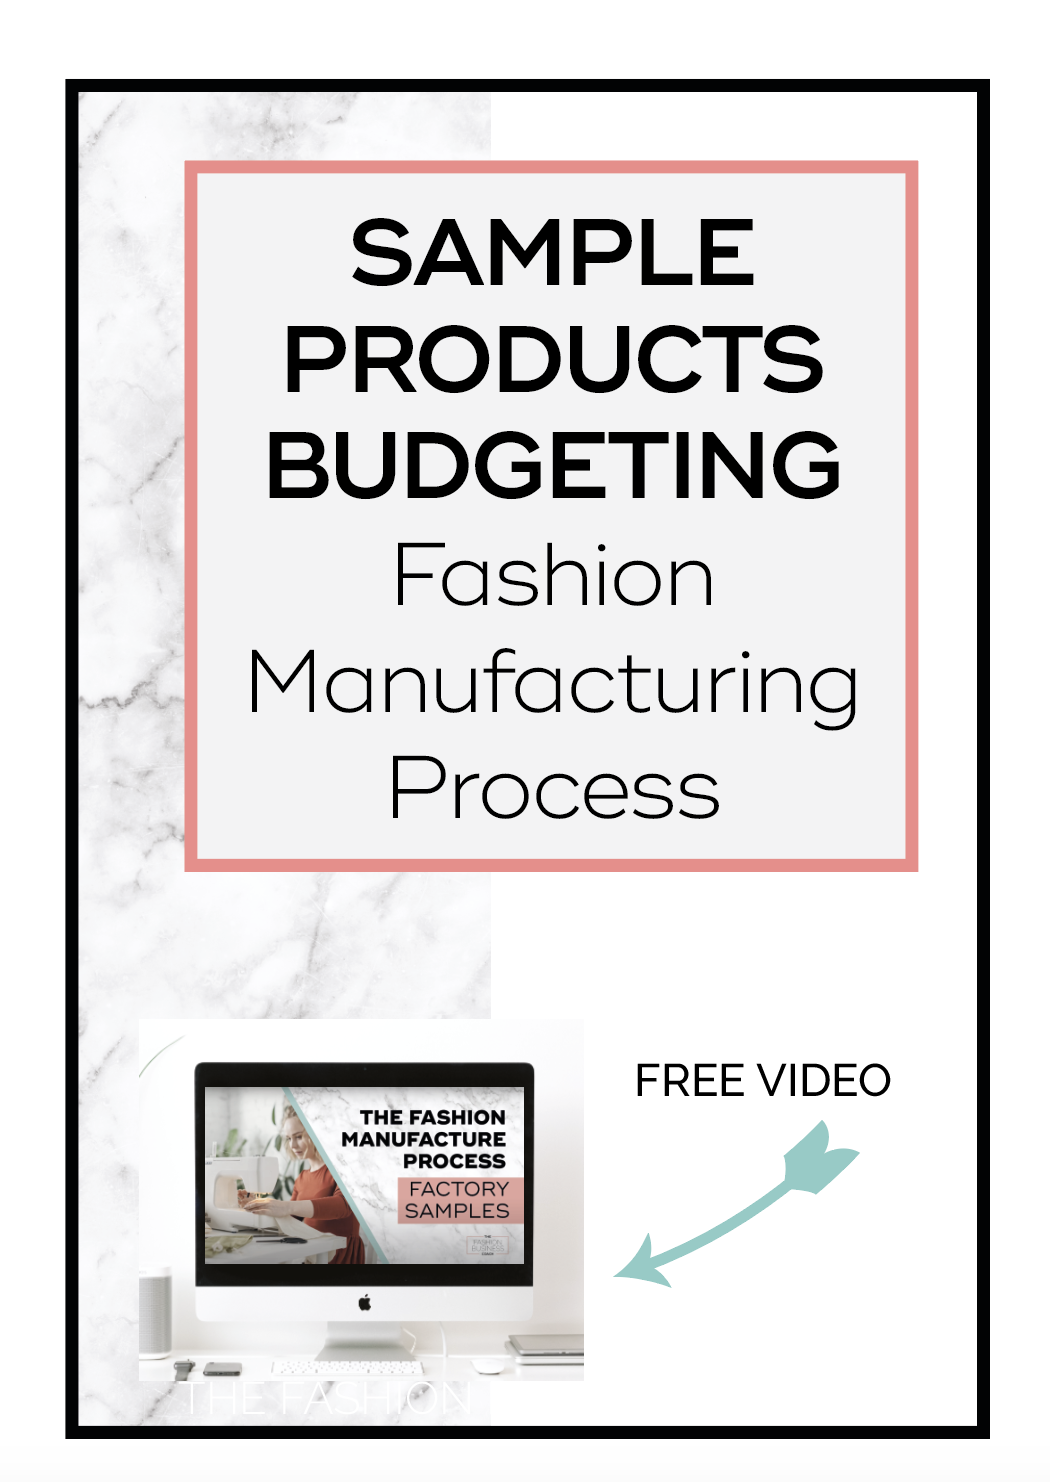 Sample Products Budgeting – Fashion Manufacturing Process 4.png